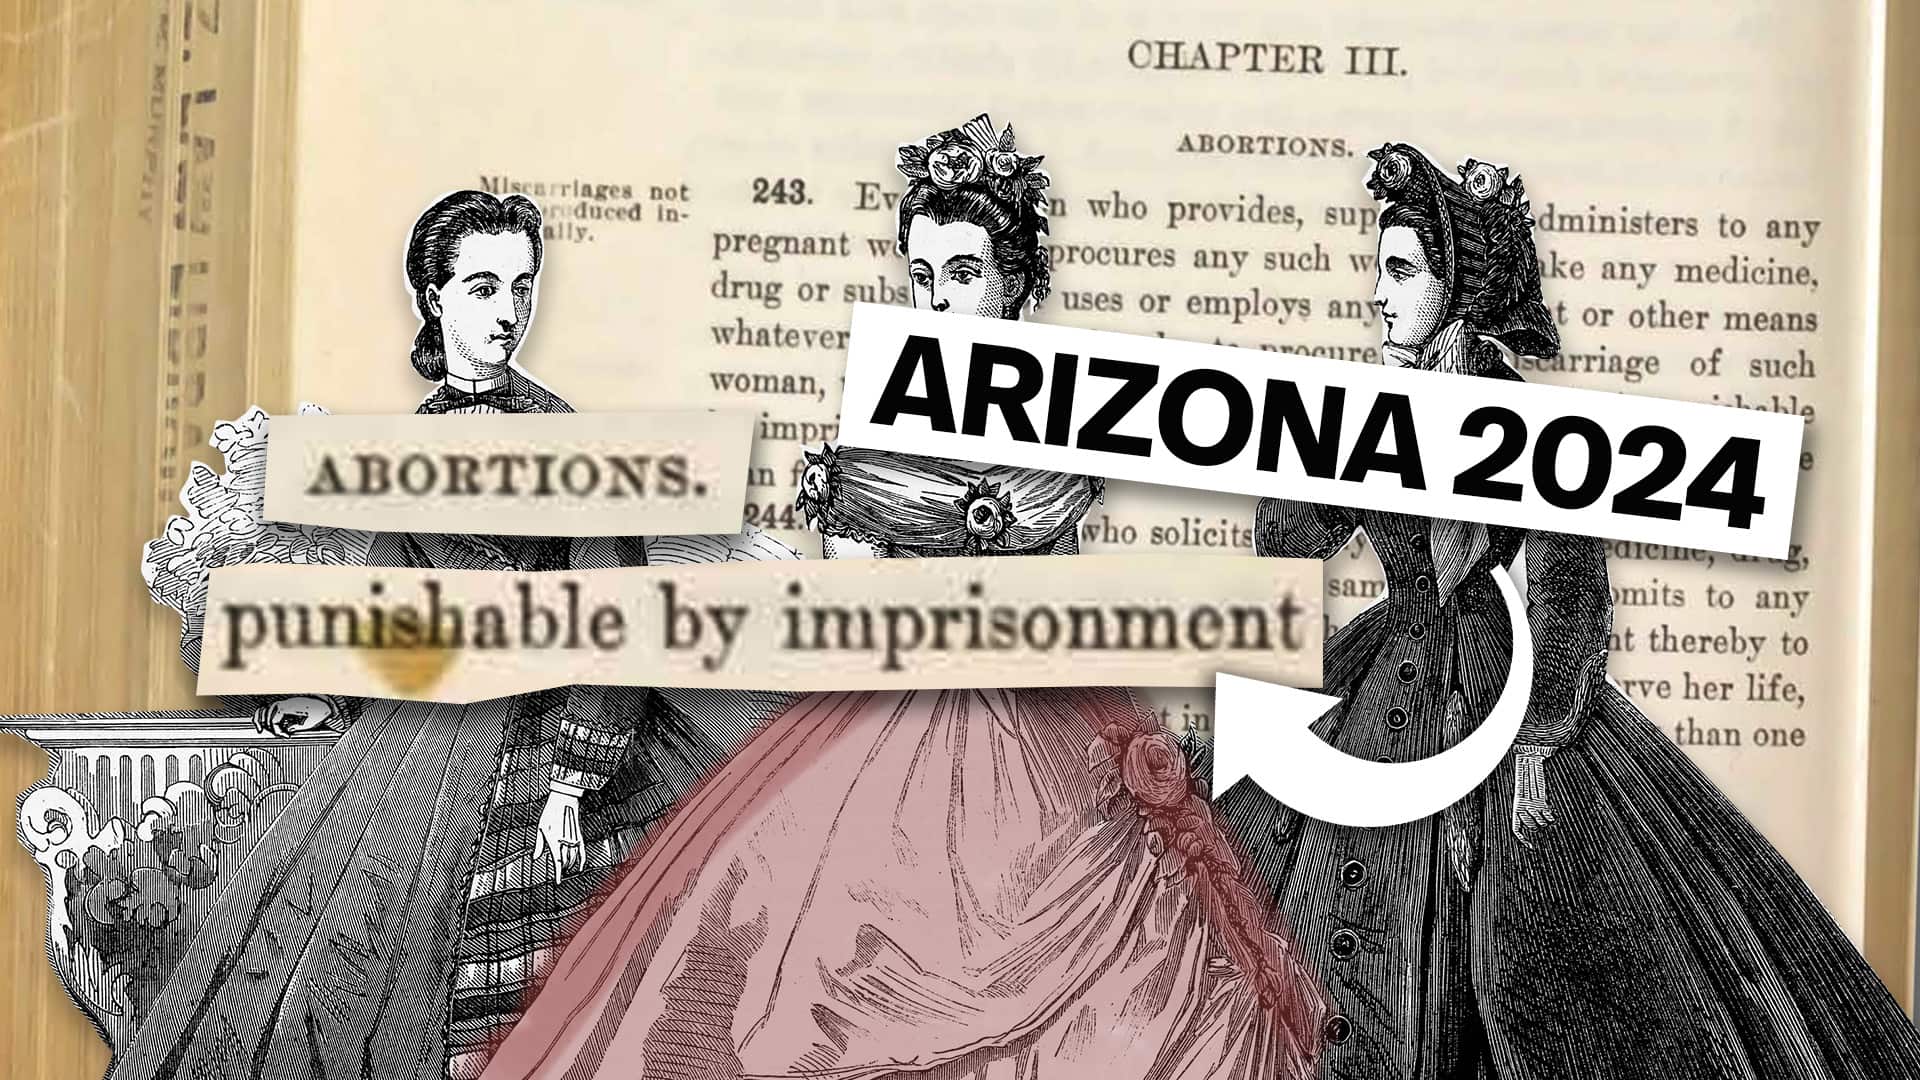 Why Arizona revived an abortion ban from 1864 | About That [Video]